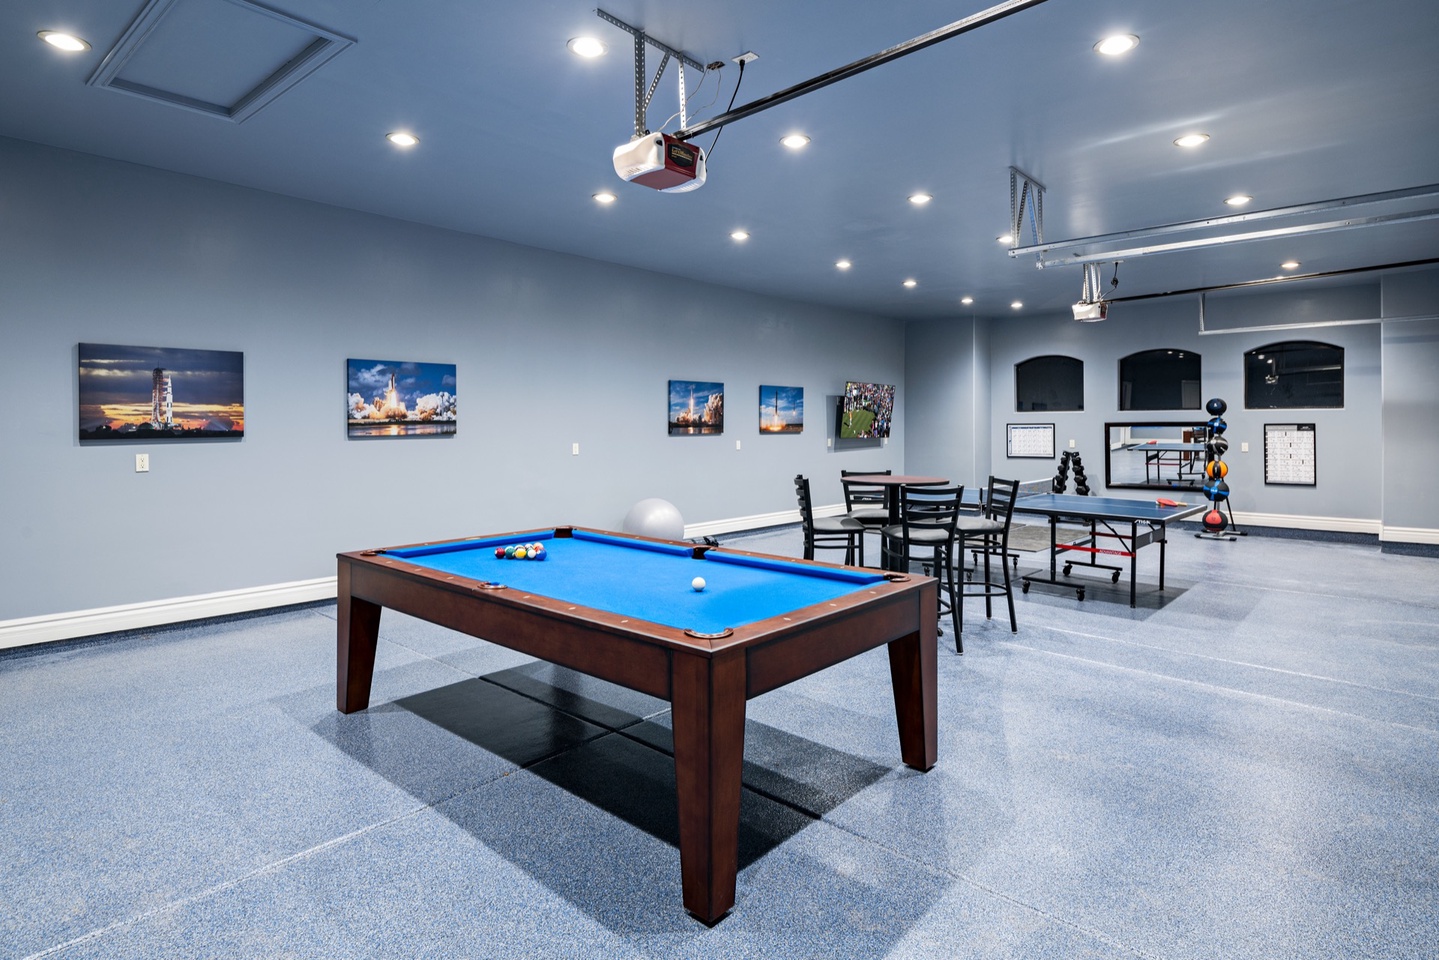 Fully equipped game room garage - pool, ping pong, workout zone